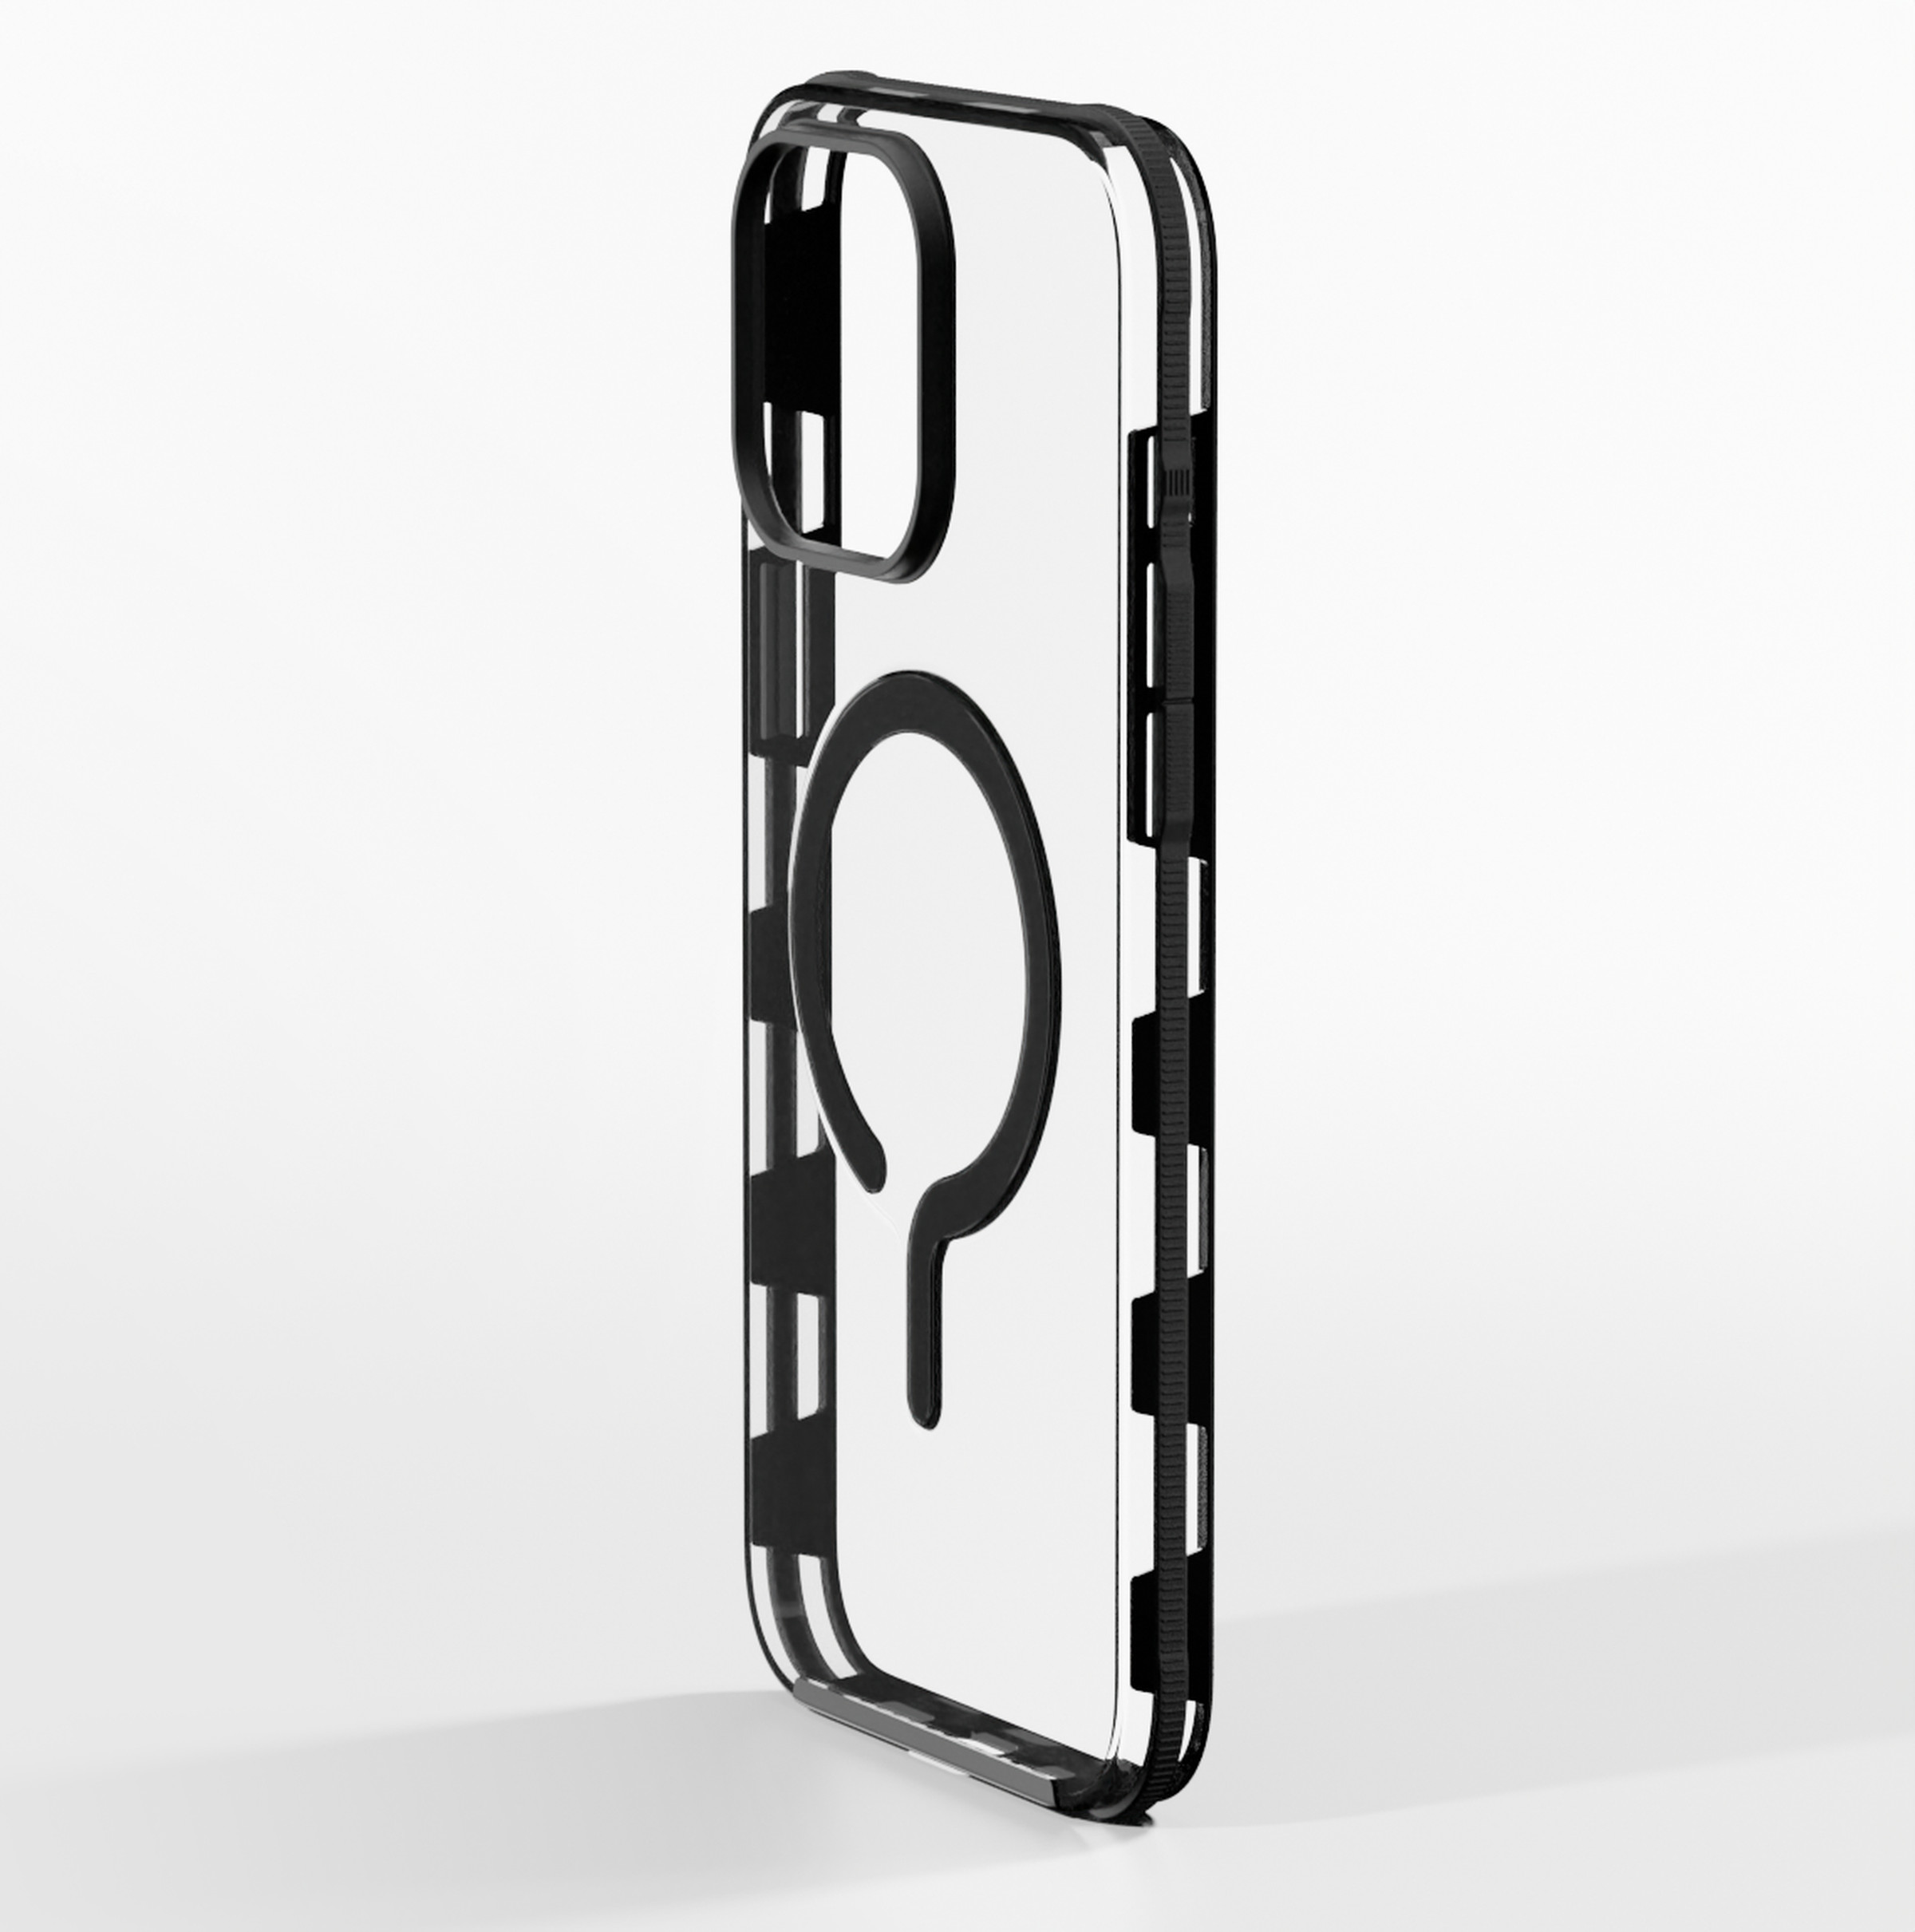 A picture of the Dbrand Ghost Case in one piece, standing up on its edge and viewed at a roughly three-quarter angle.